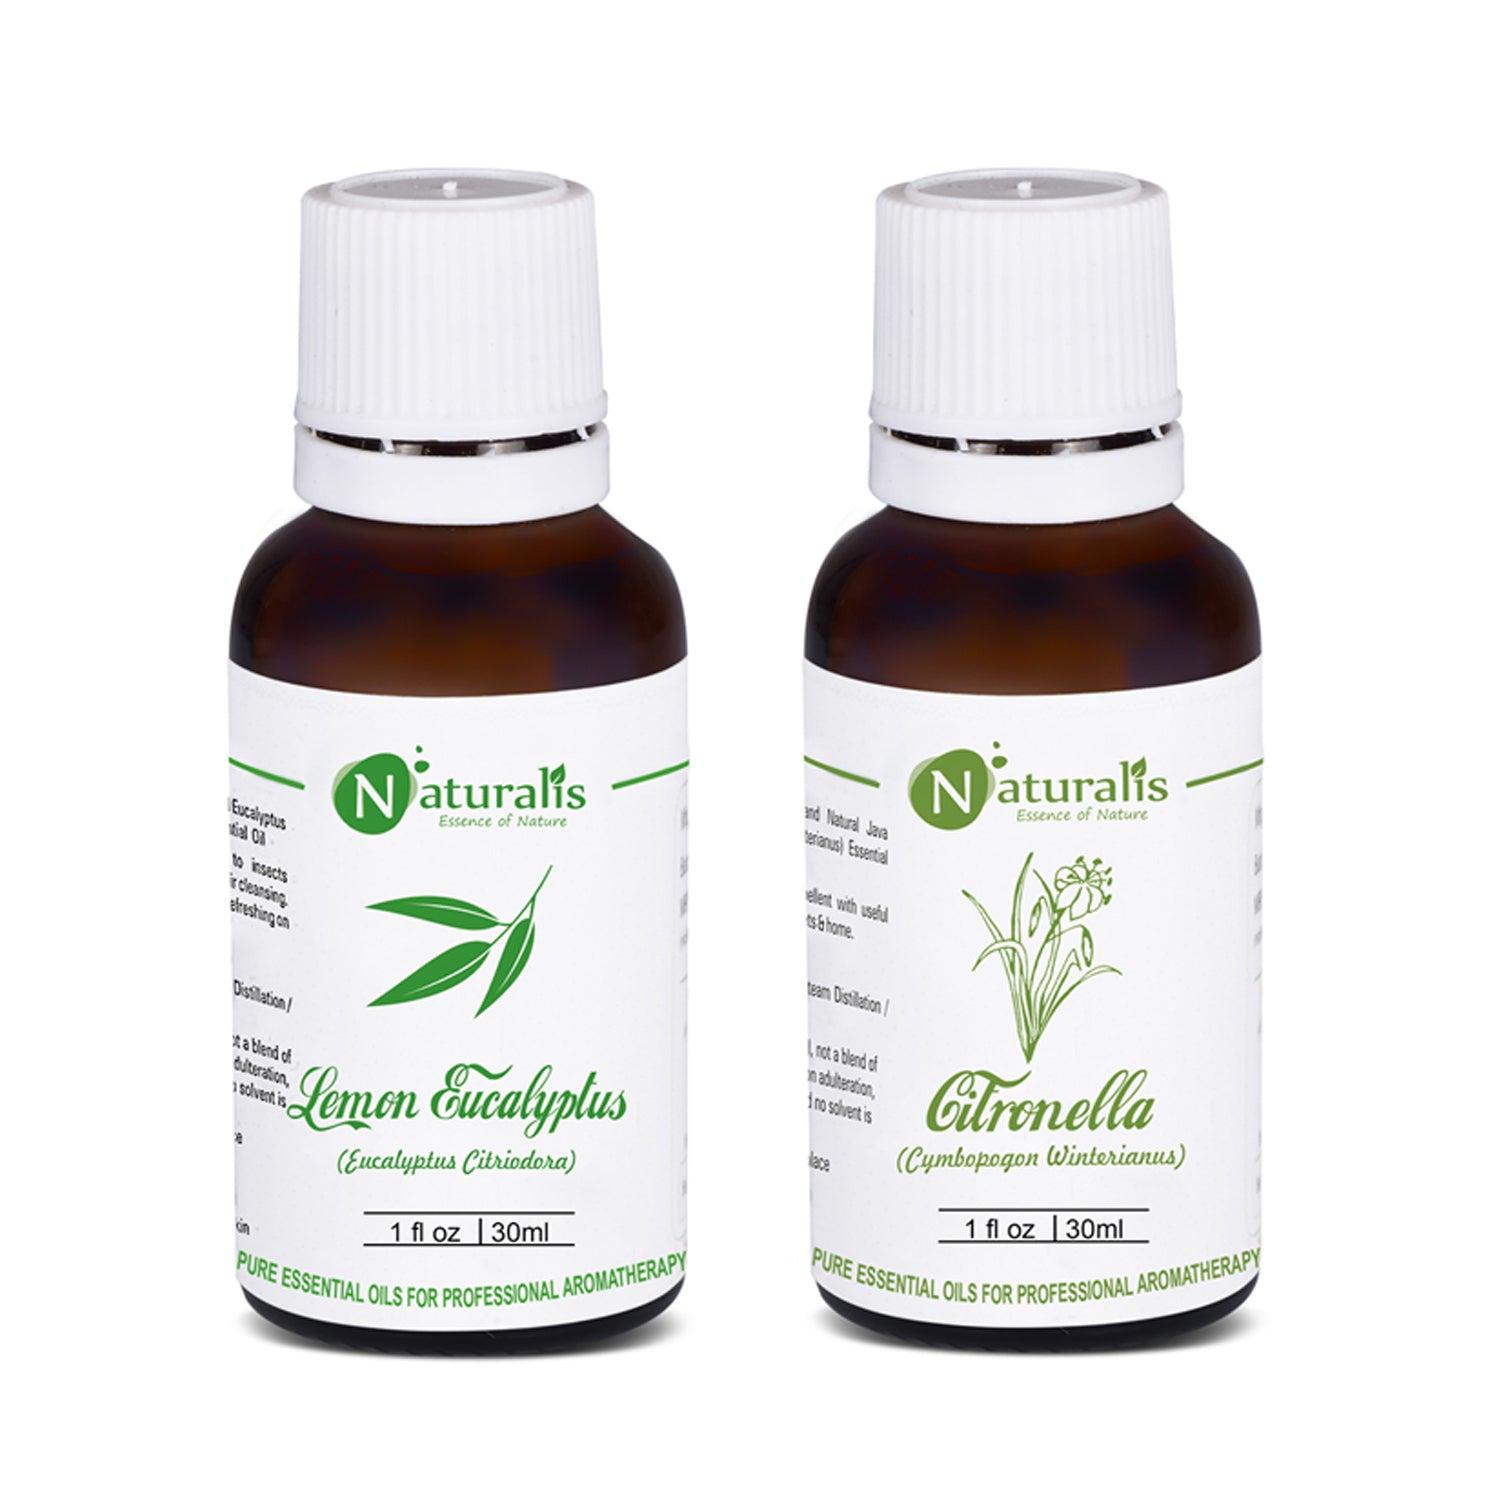 Lemon Eucalyptus & Citronella Essential Oil for Insect/Mosquito Repellent Set of 2-30ml by Naturalis - Pure & Natural - Naturalis